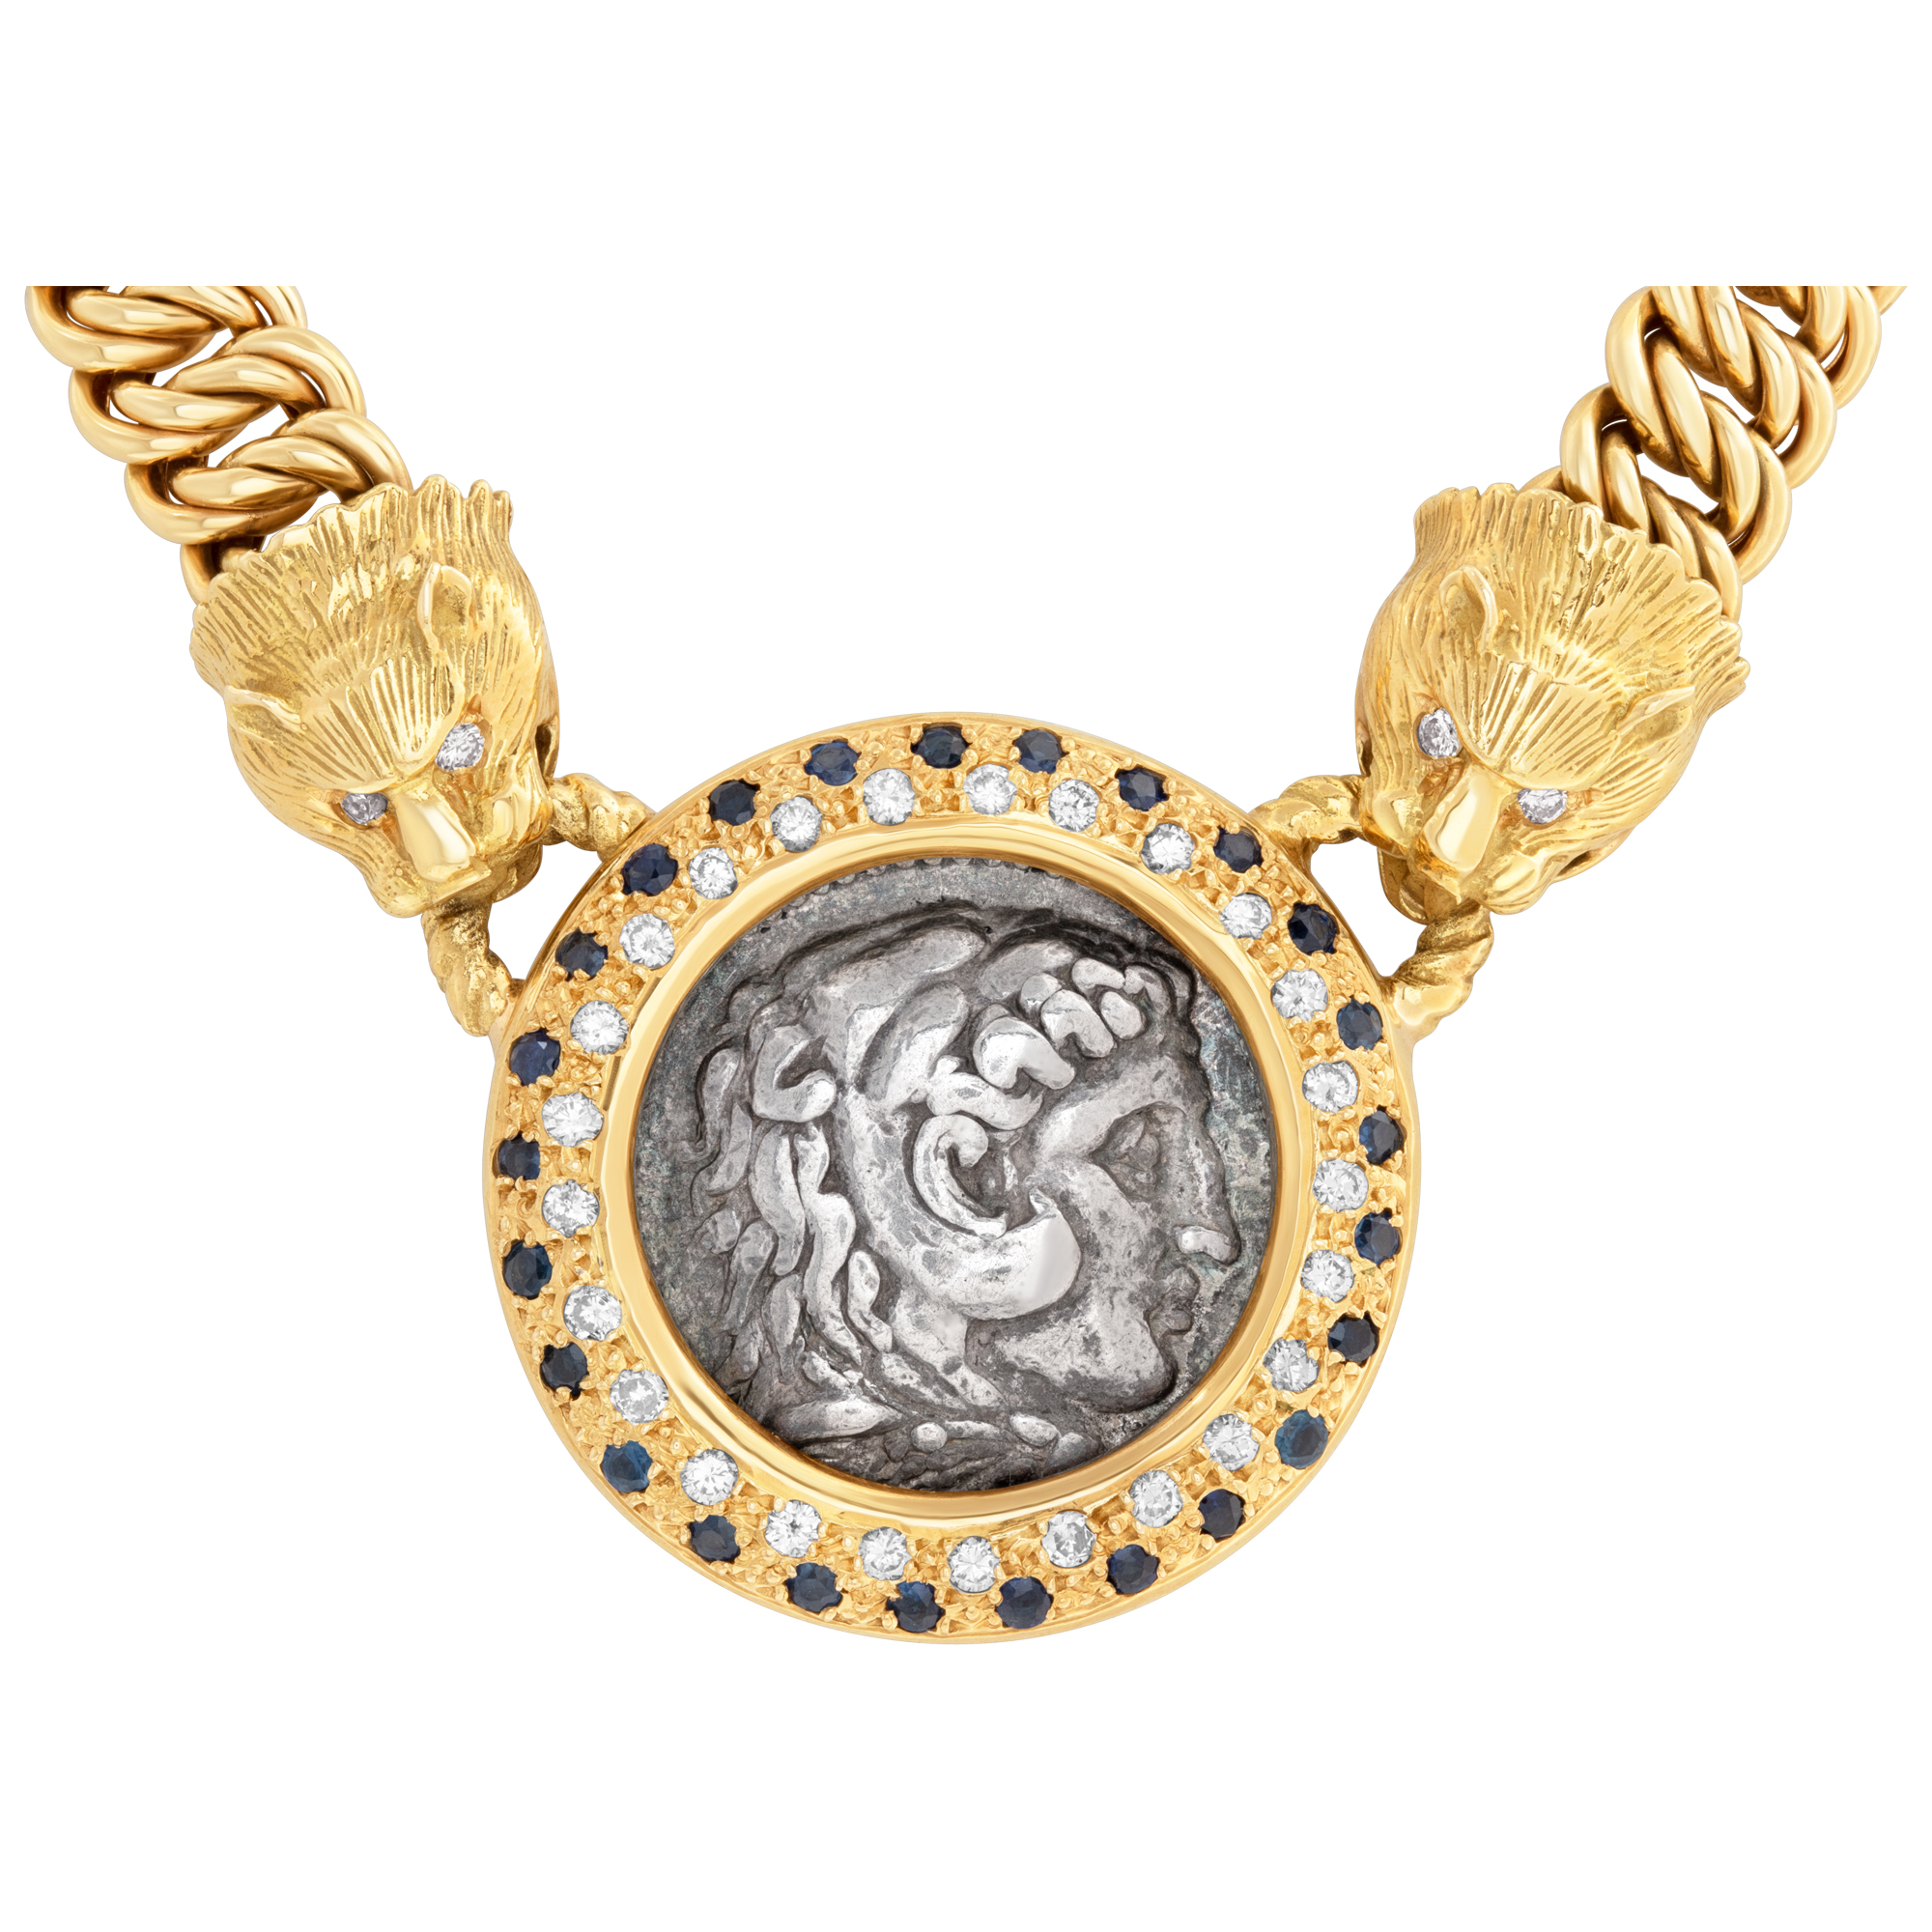 Chain/necklace with Alexander the Great, greek drachma coin center pendant, set in 14k gold, with diamonds & sapphires.